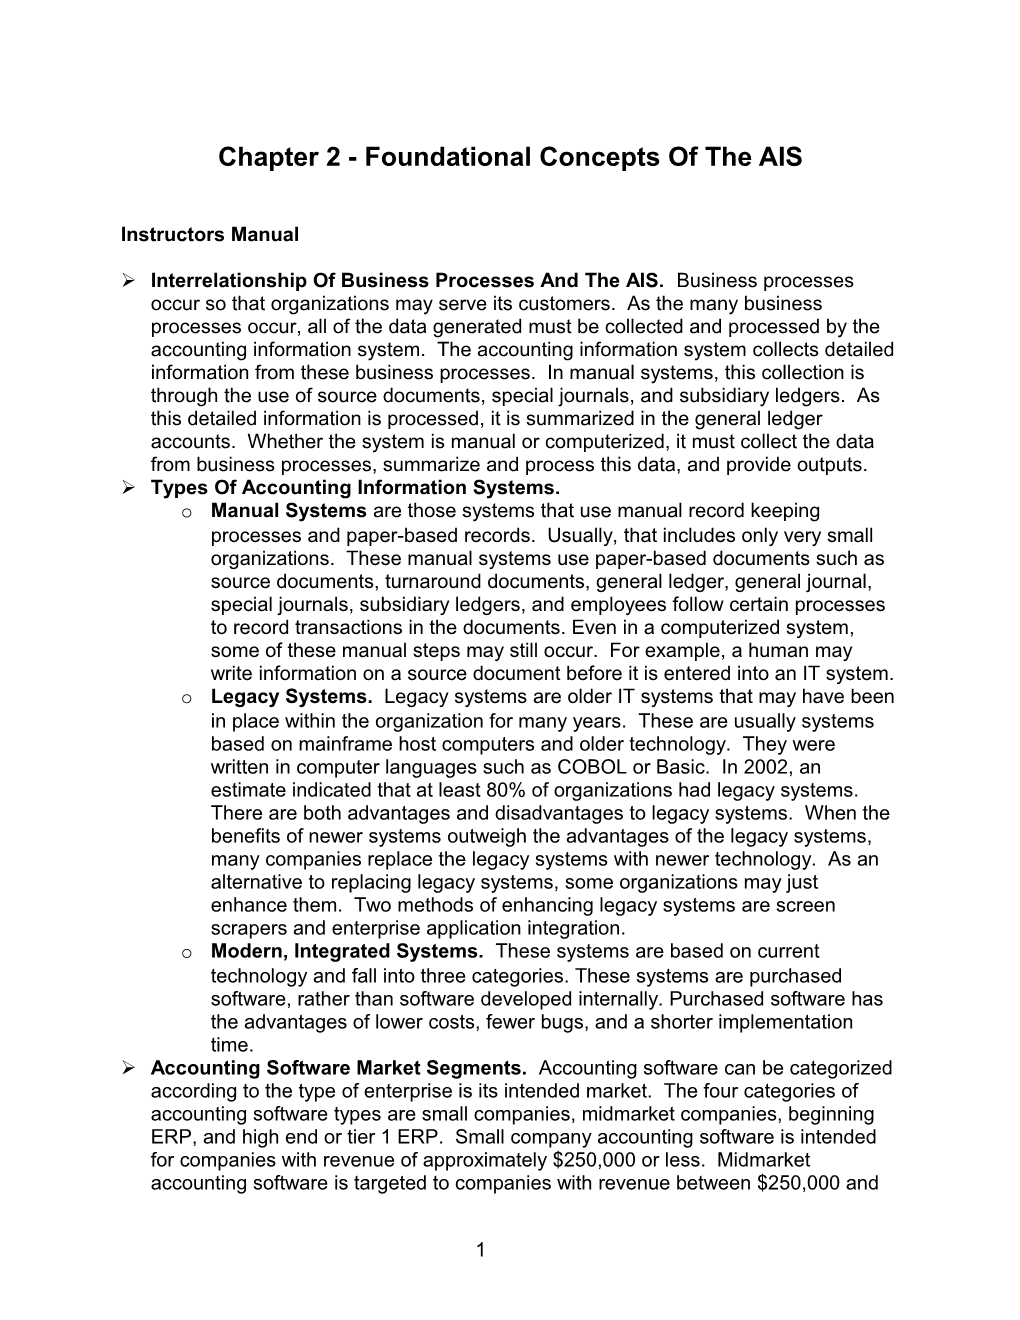 Chapter 2 - Foundational Concepts of the AIS